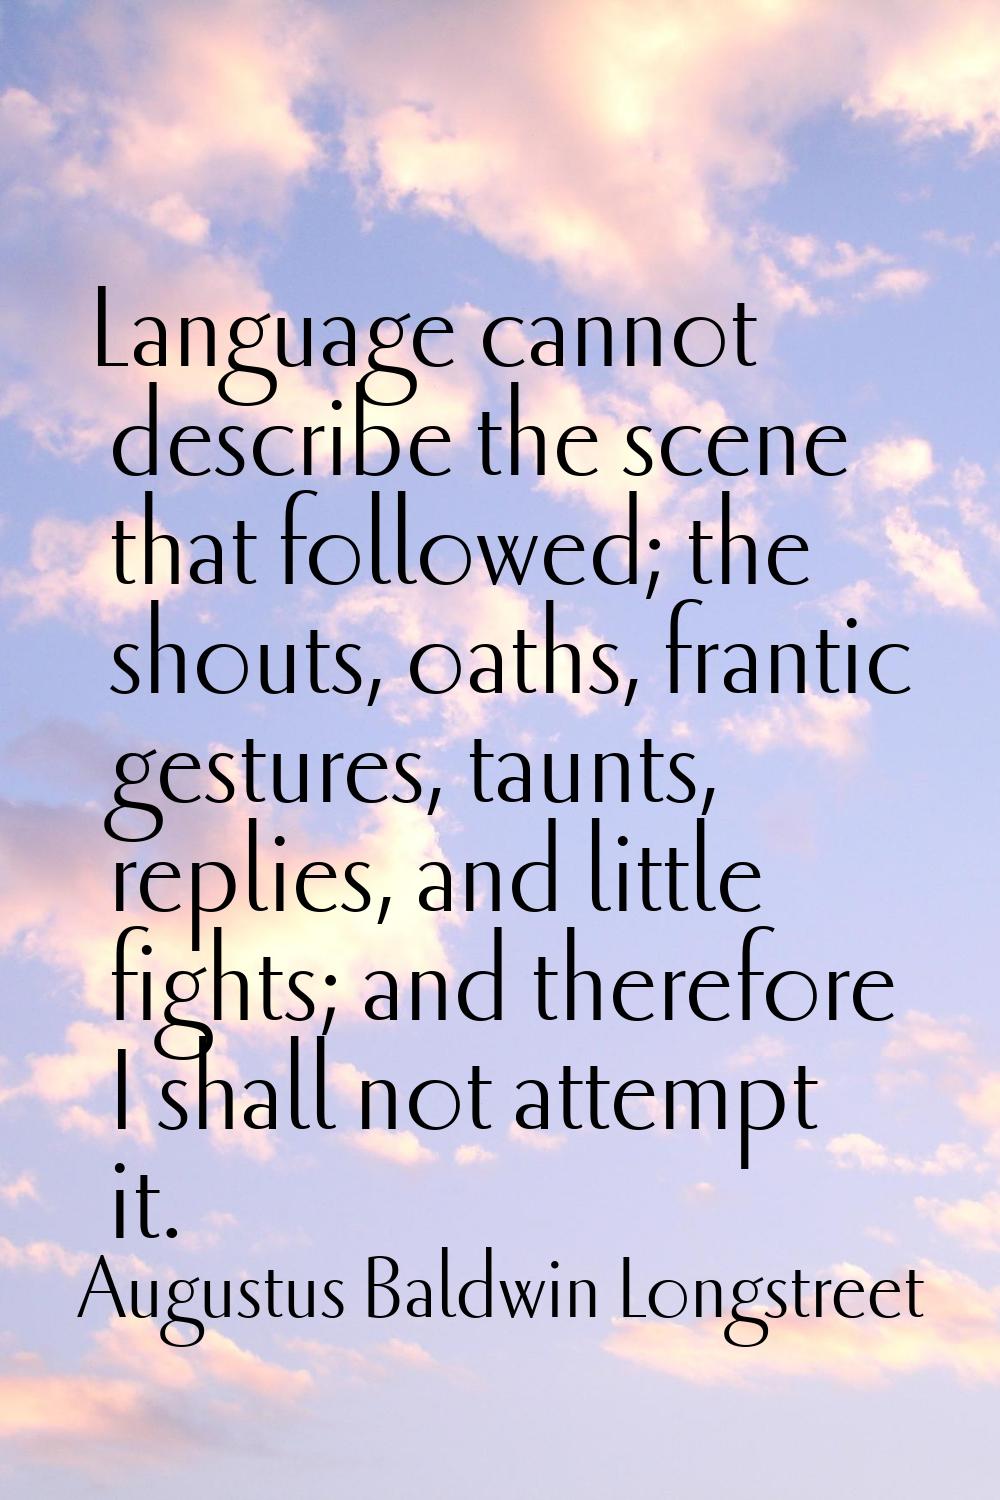 Language cannot describe the scene that followed; the shouts, oaths, frantic gestures, taunts, repl